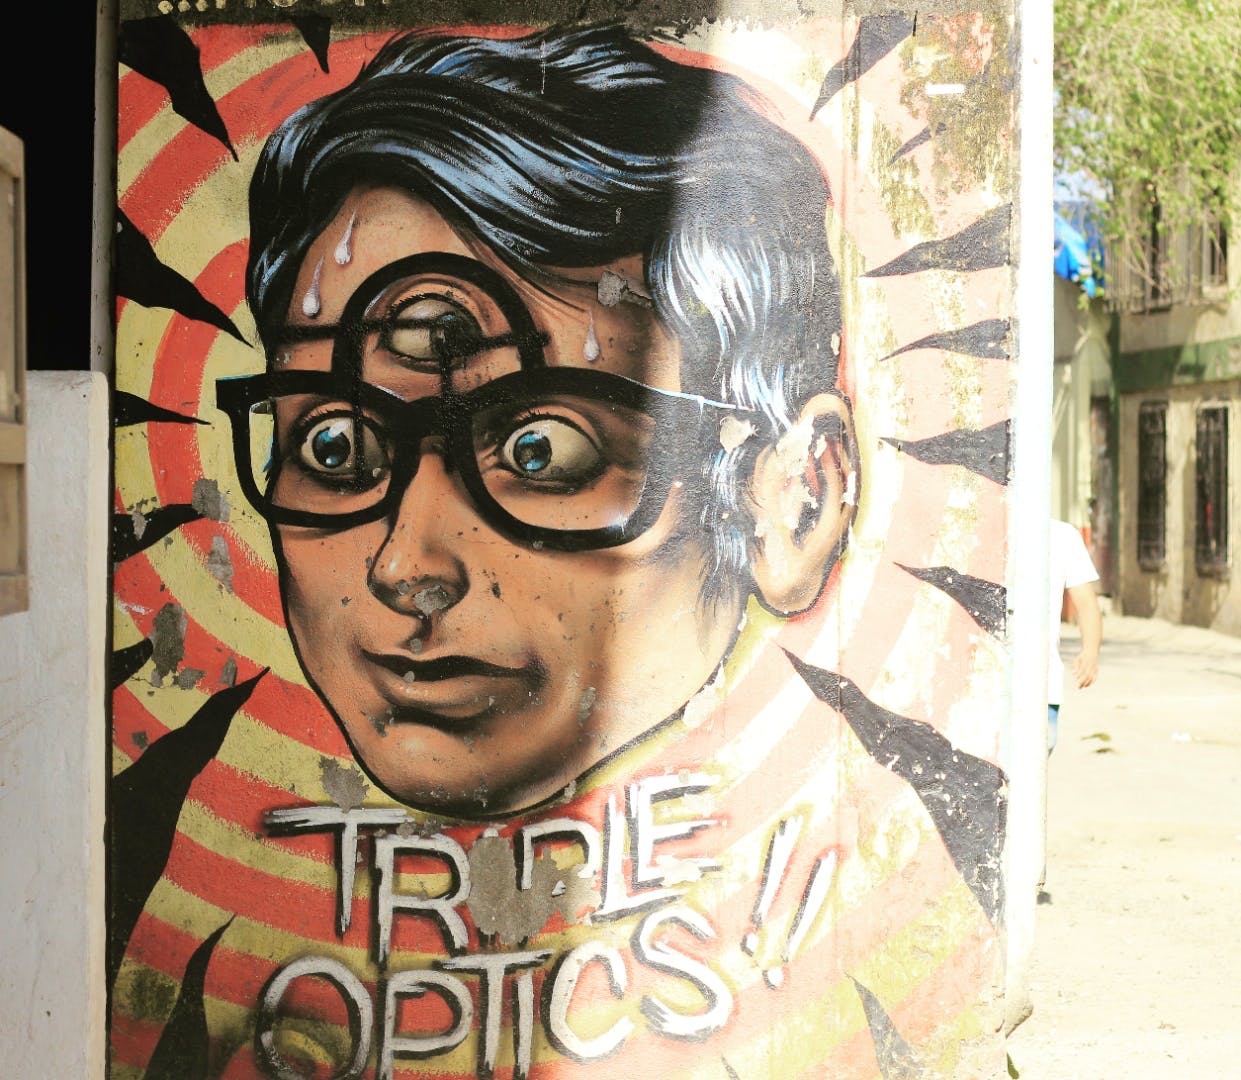 Quirky Walls Are Everything: Check Out The Amazing Street Art Next Time You Are In Bandra